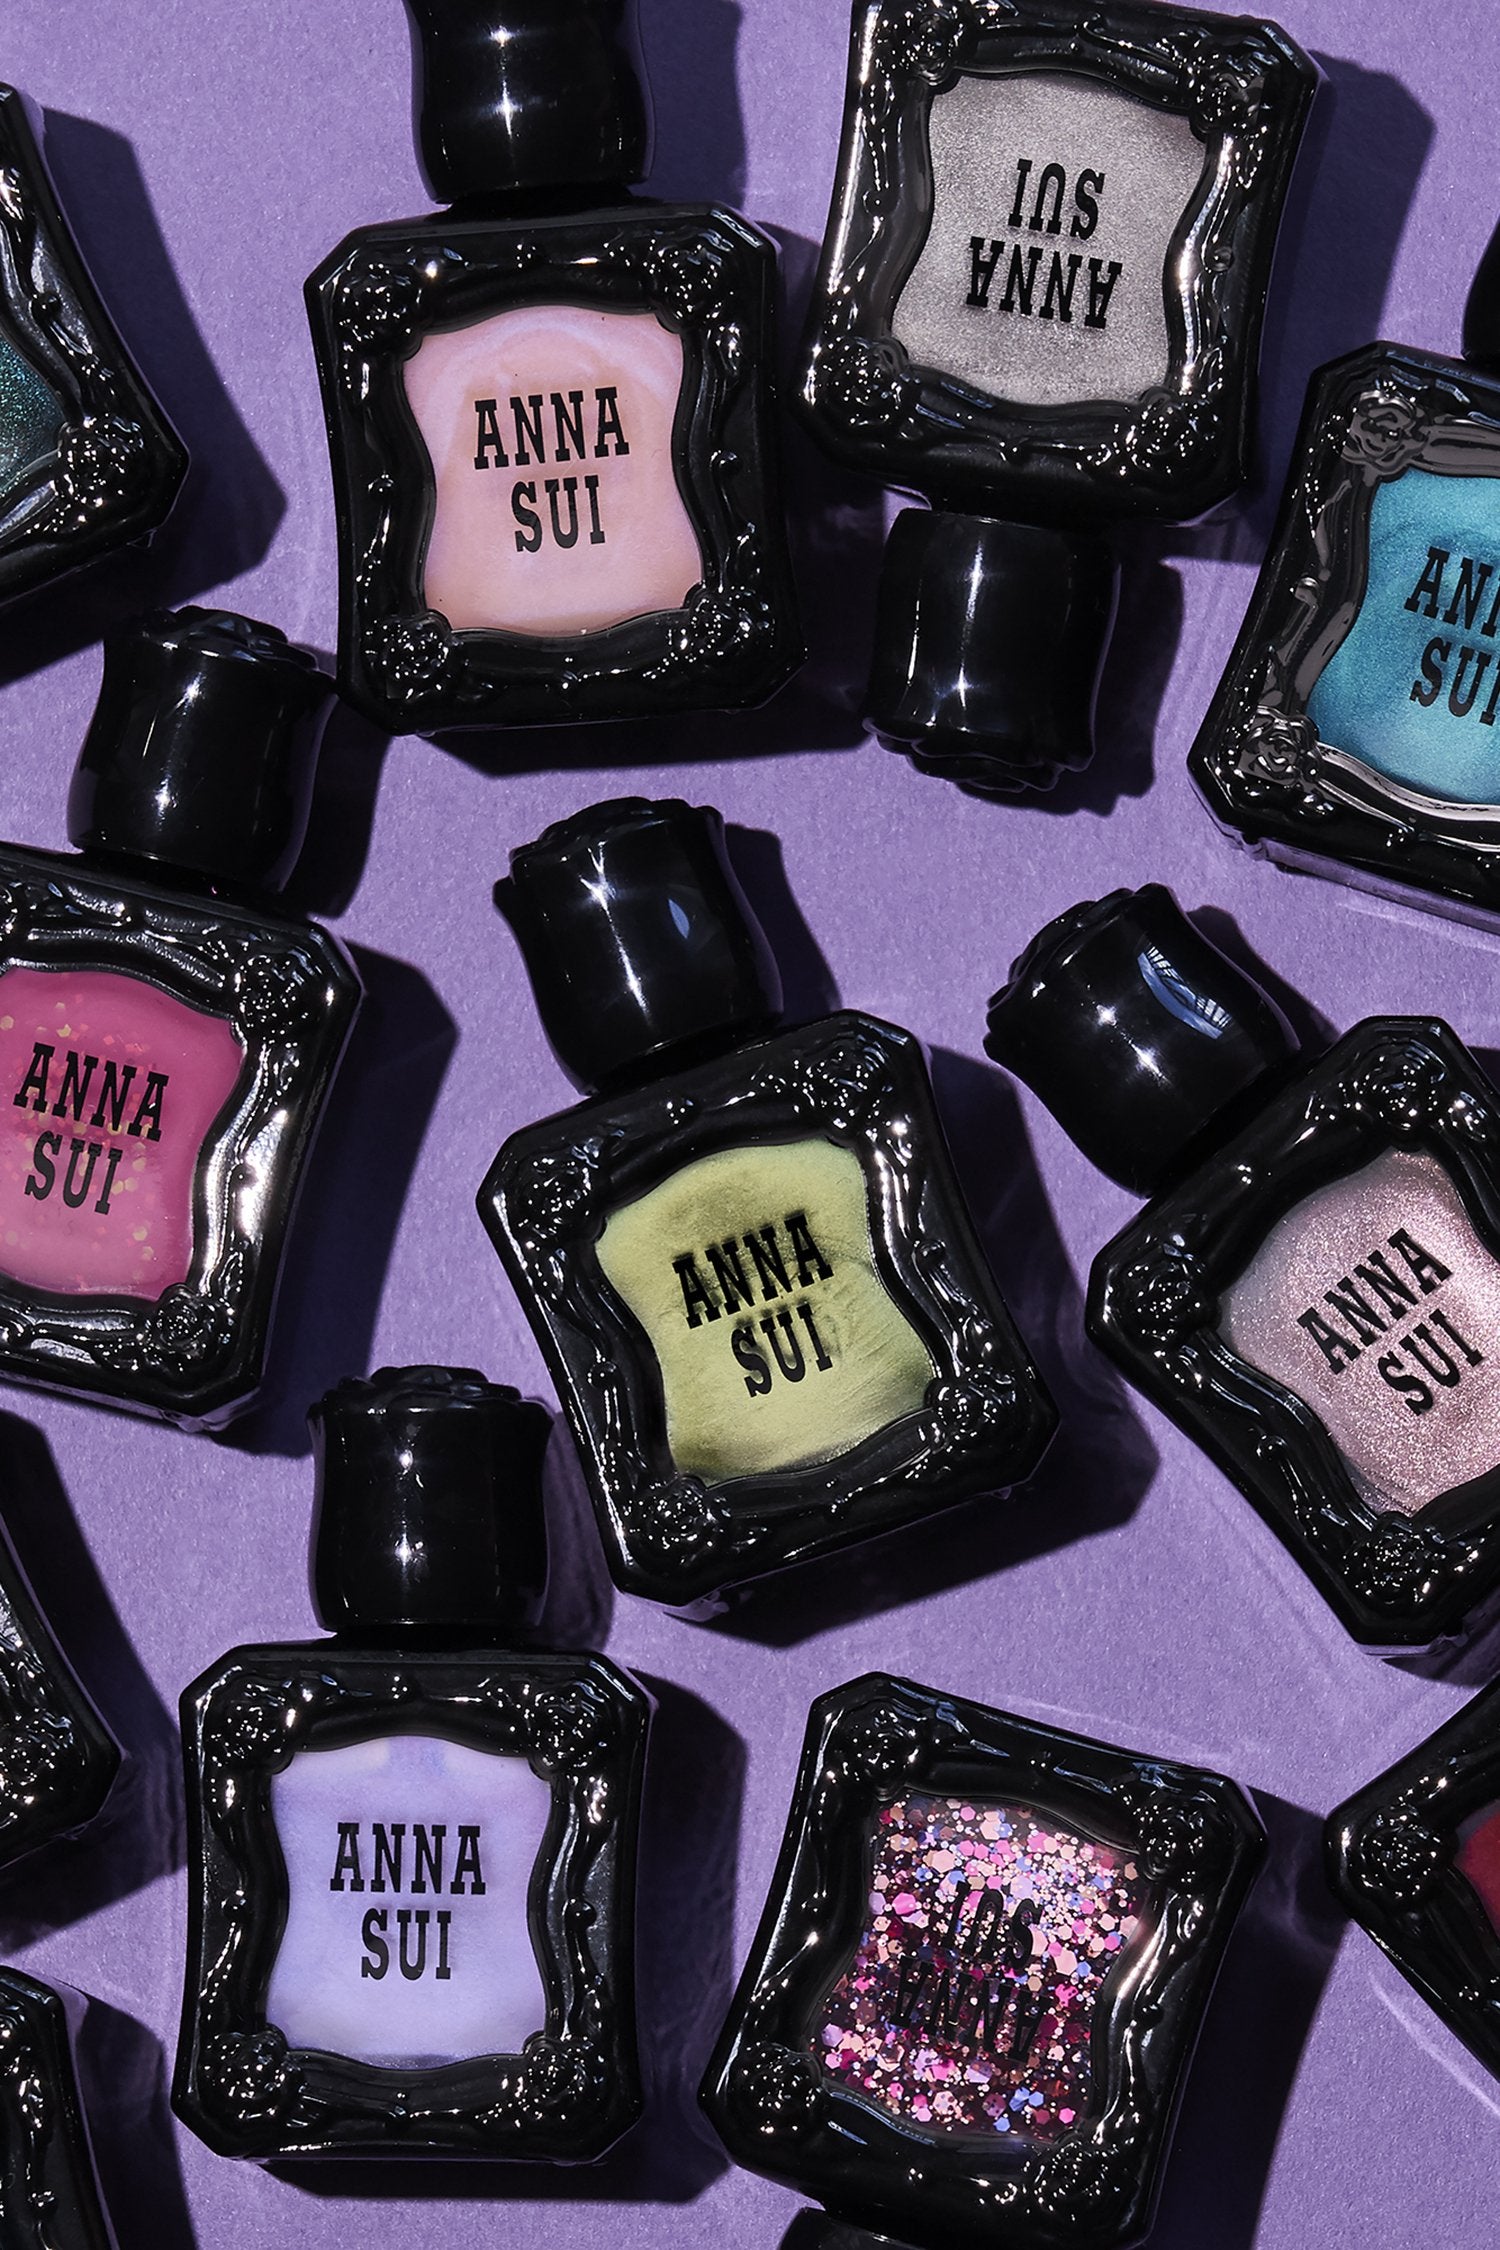 Nail Polish bottles, with raised rose pattern, Anna Sui in black over colors options in bottle side